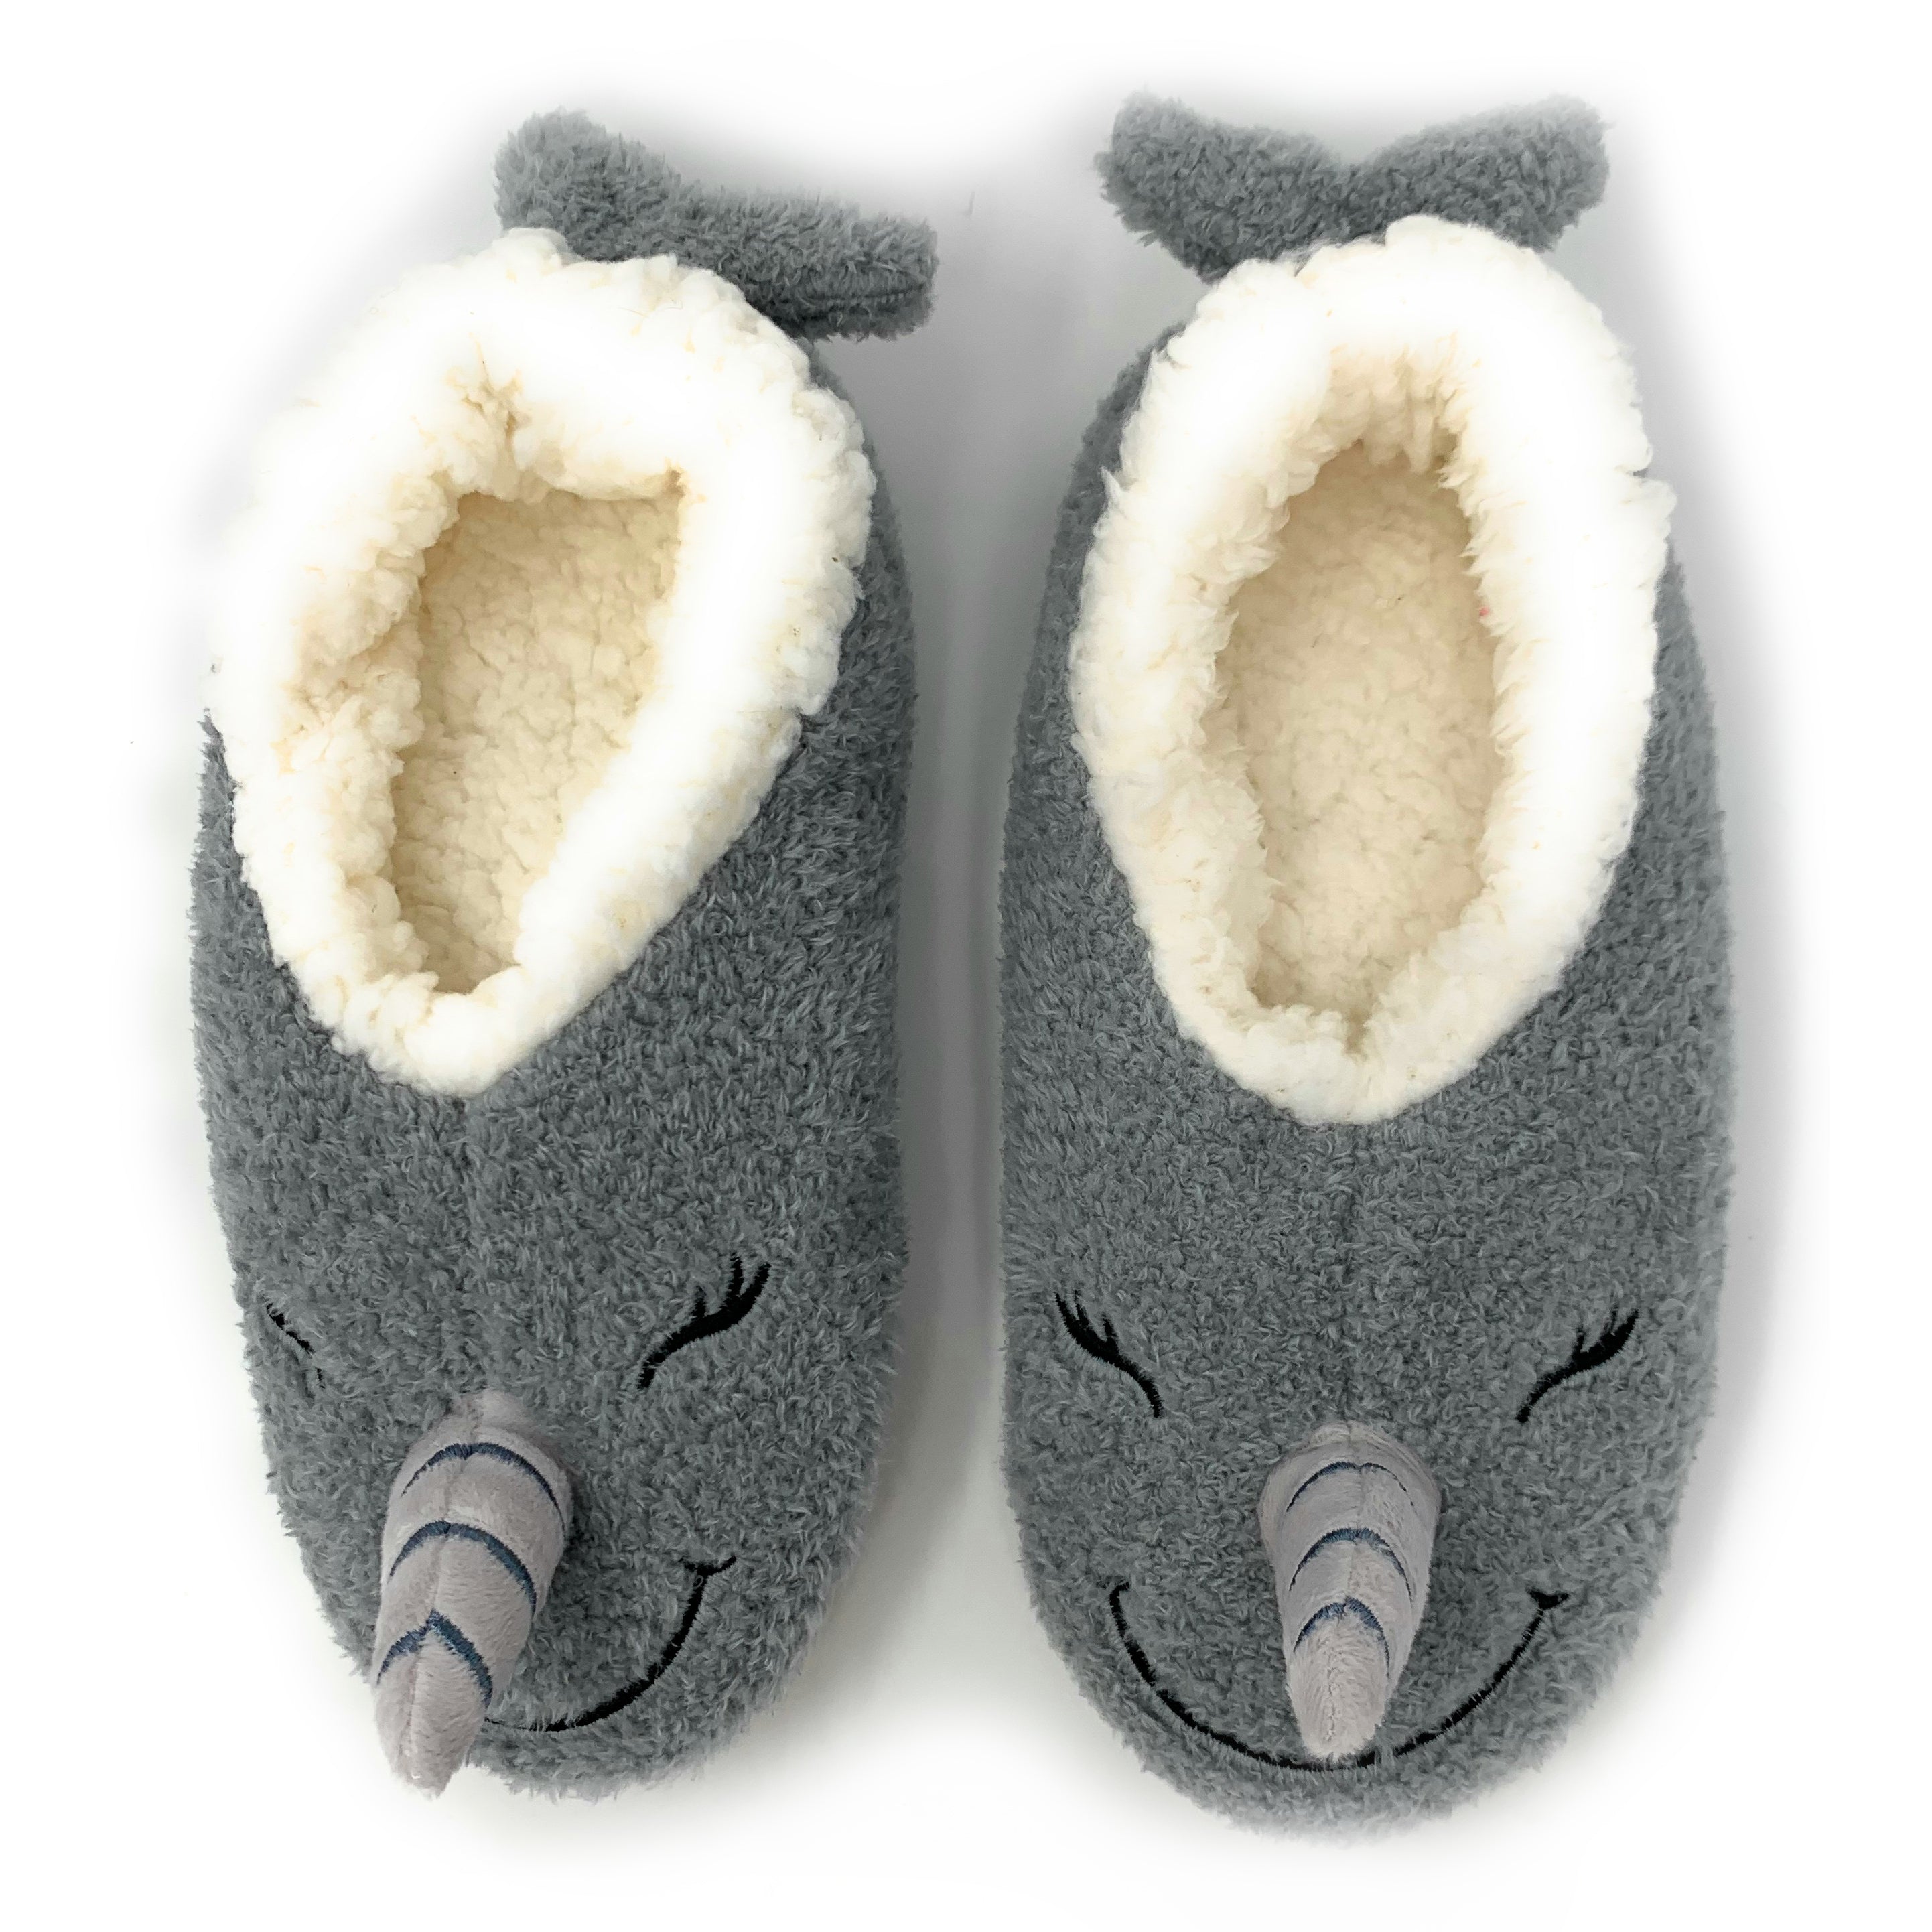 Narwhal Fuzzy Animal Slippers for Women